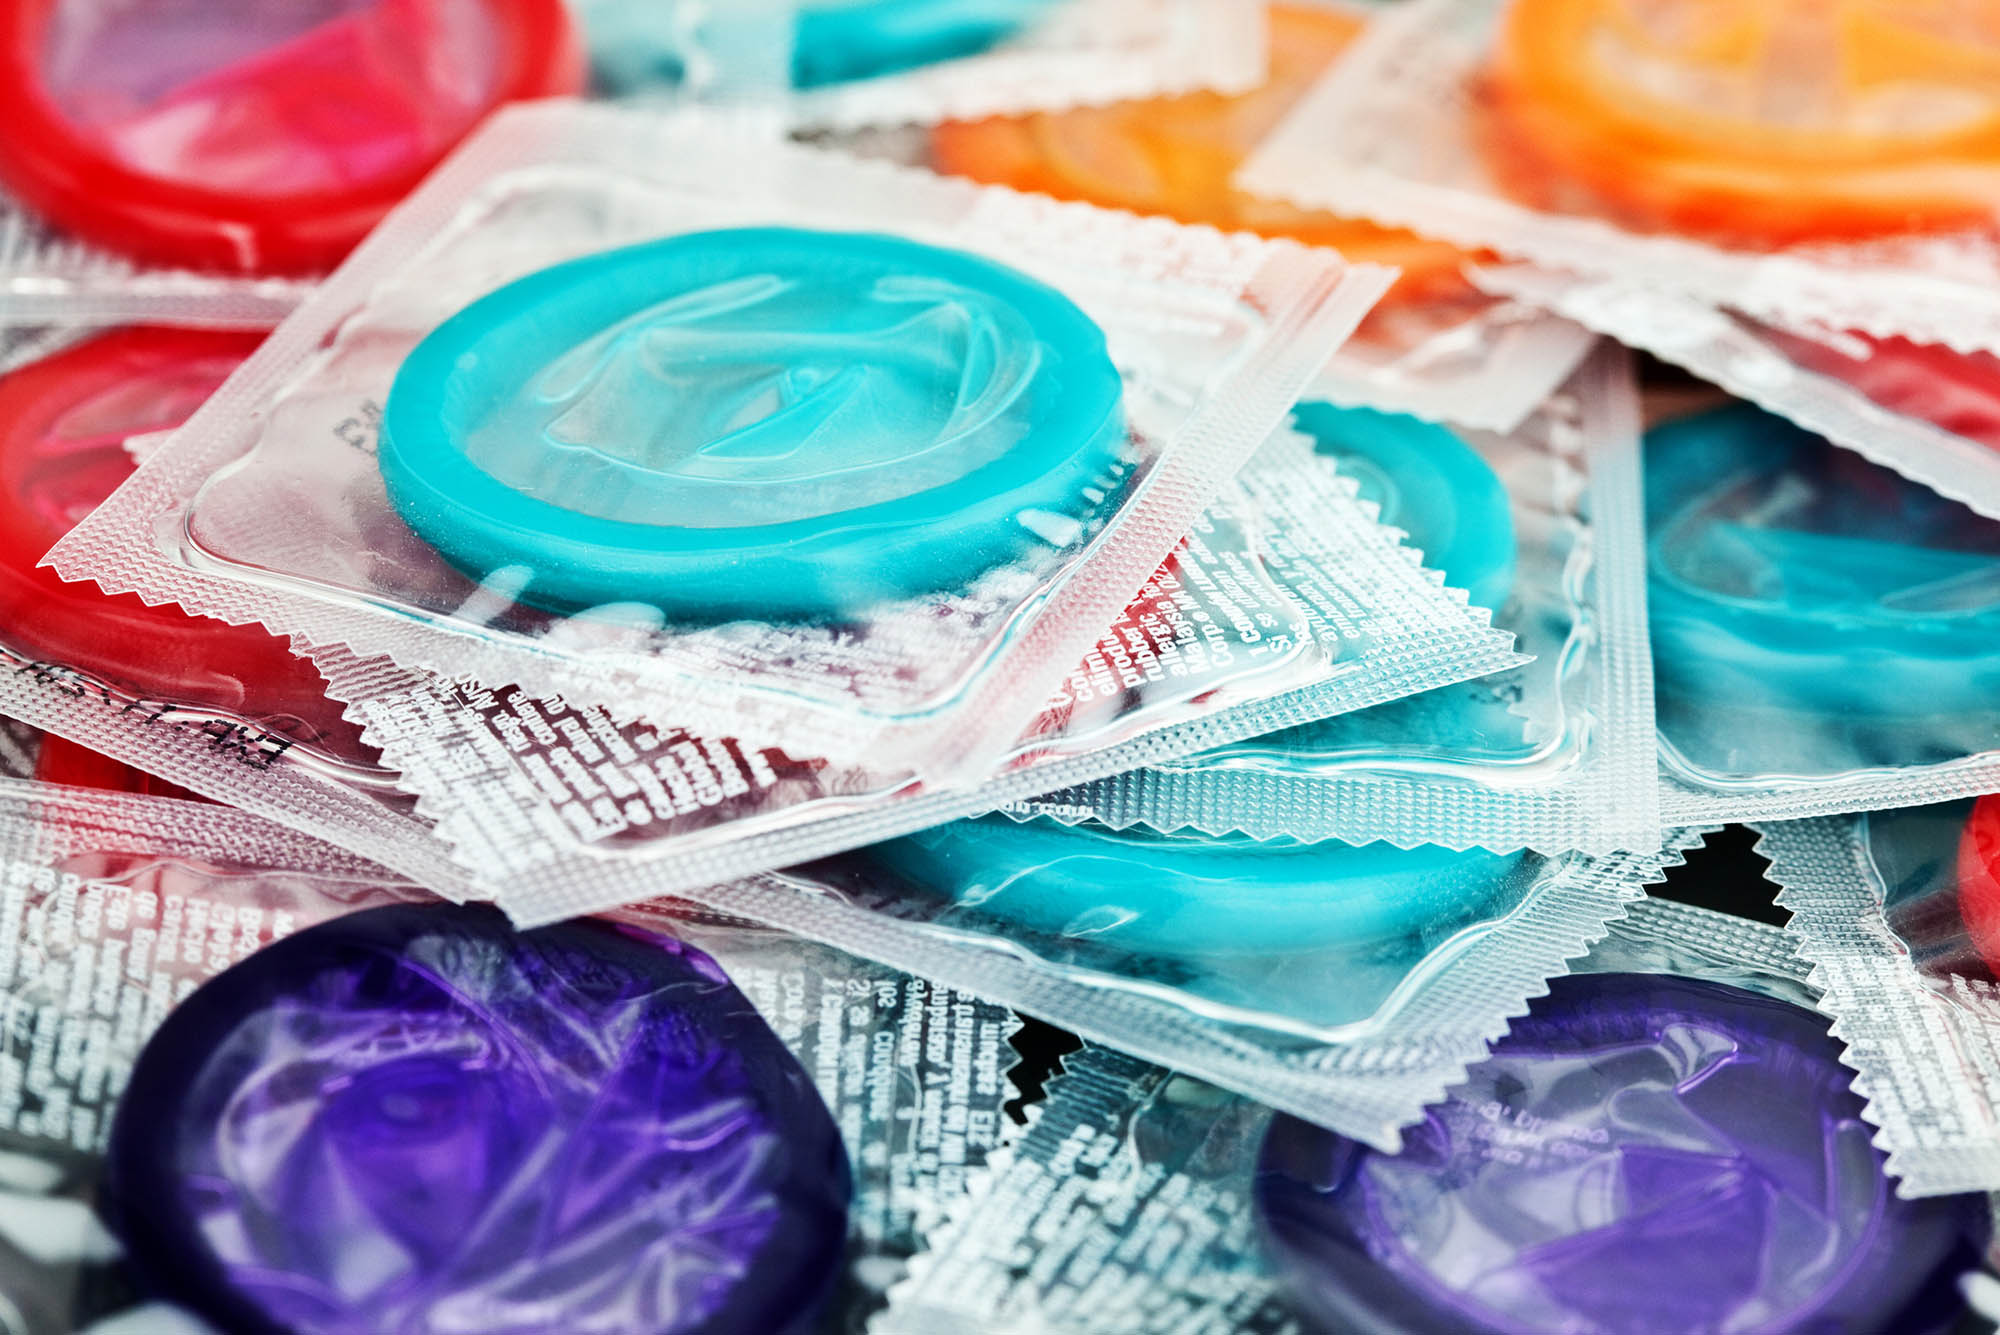 Photo: A stock photo of a collection of colorful condoms